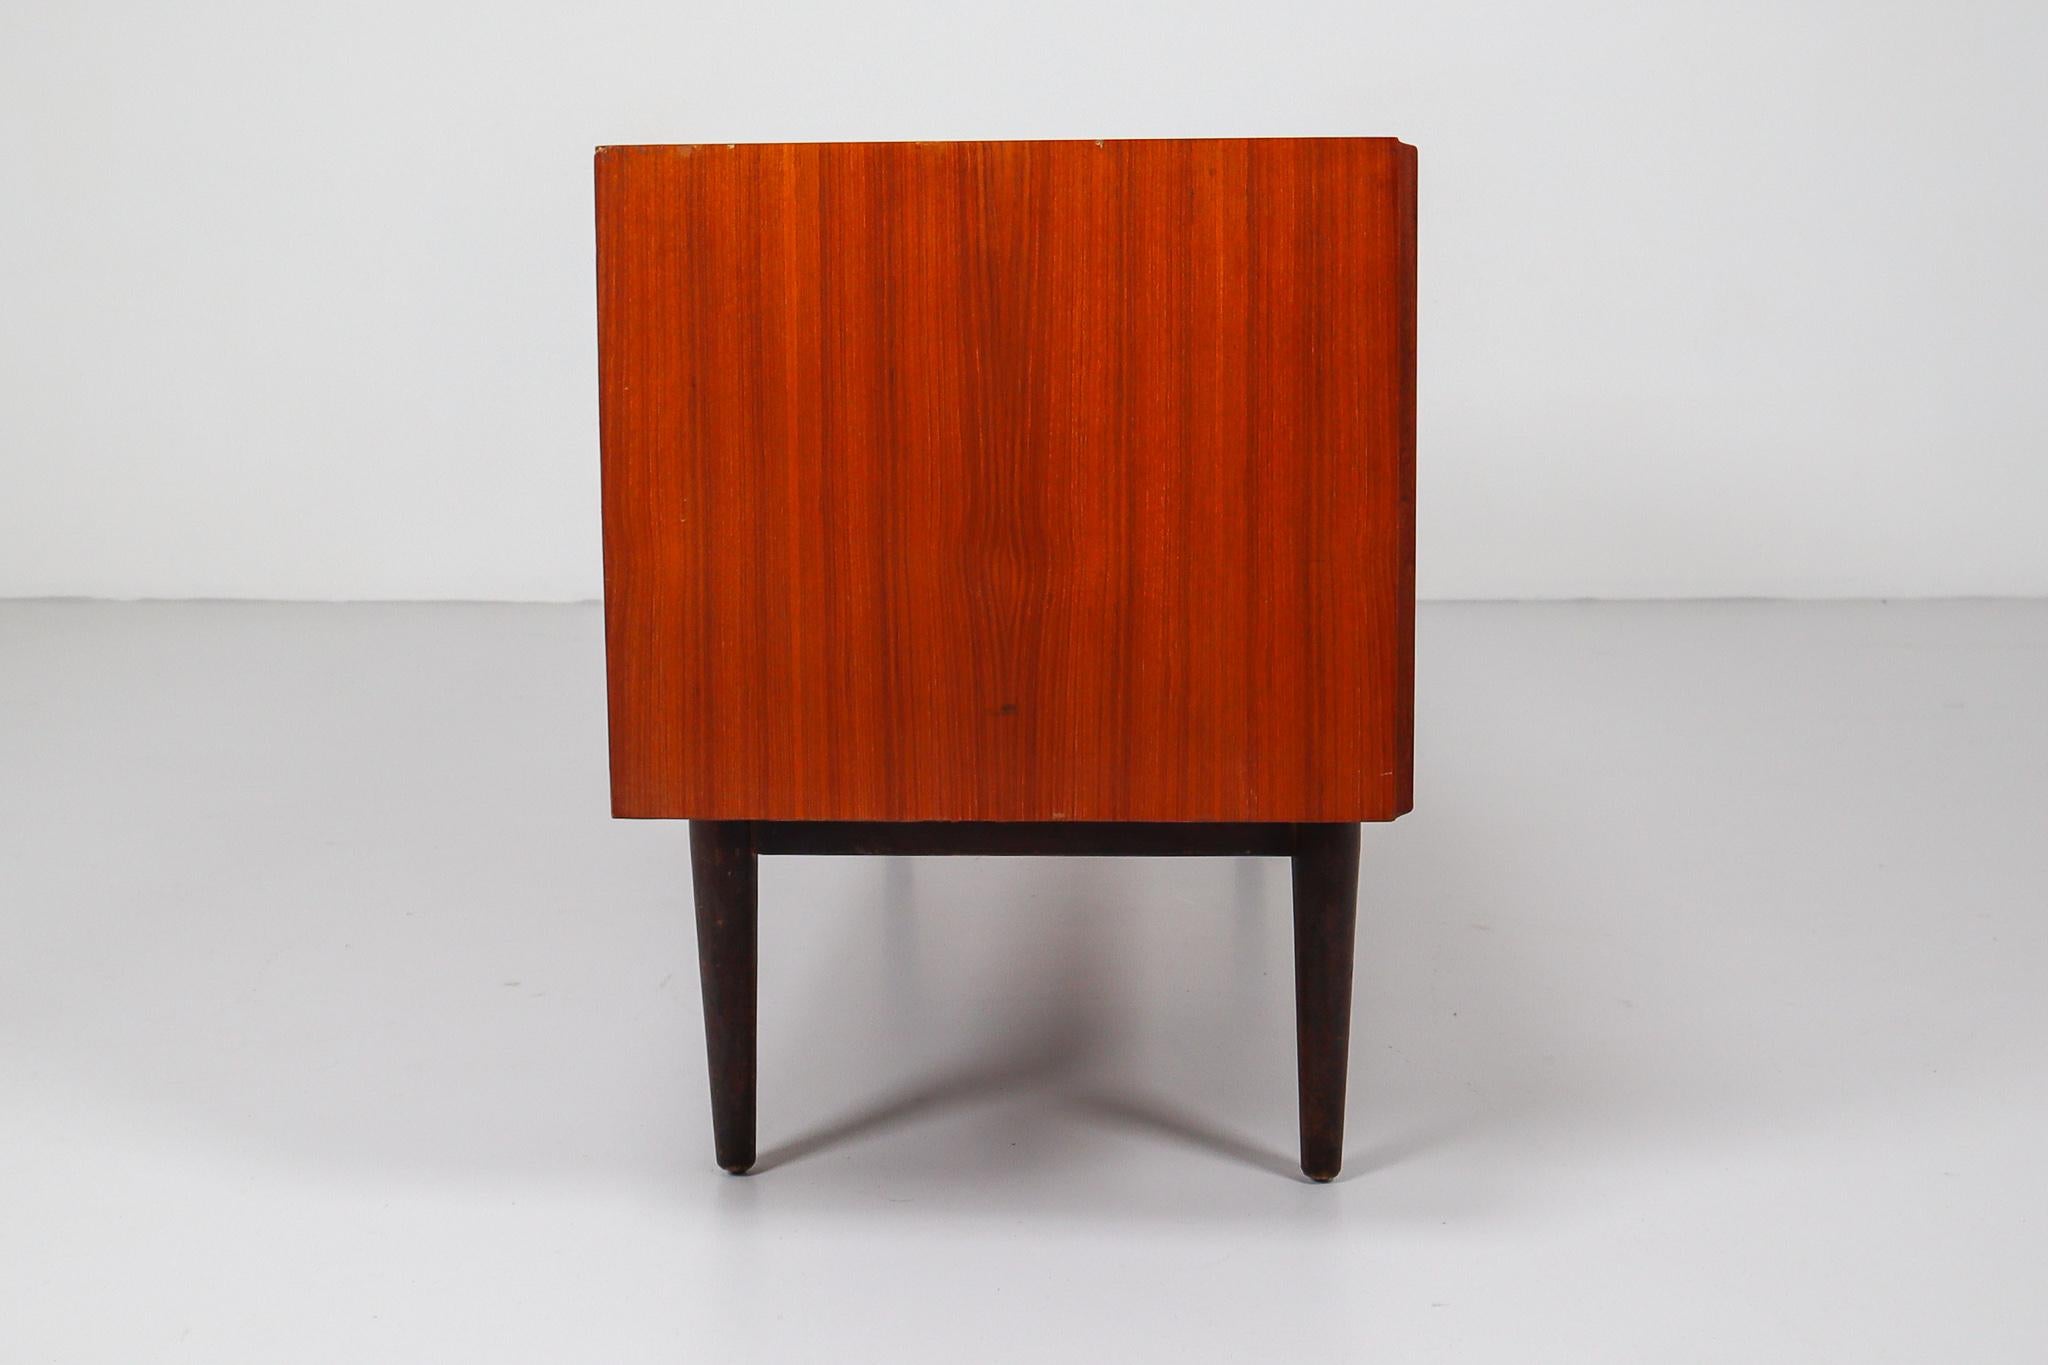 20th Century Minimalism Teak Sideboard or Credenza from the 1960s, Made in Denmark